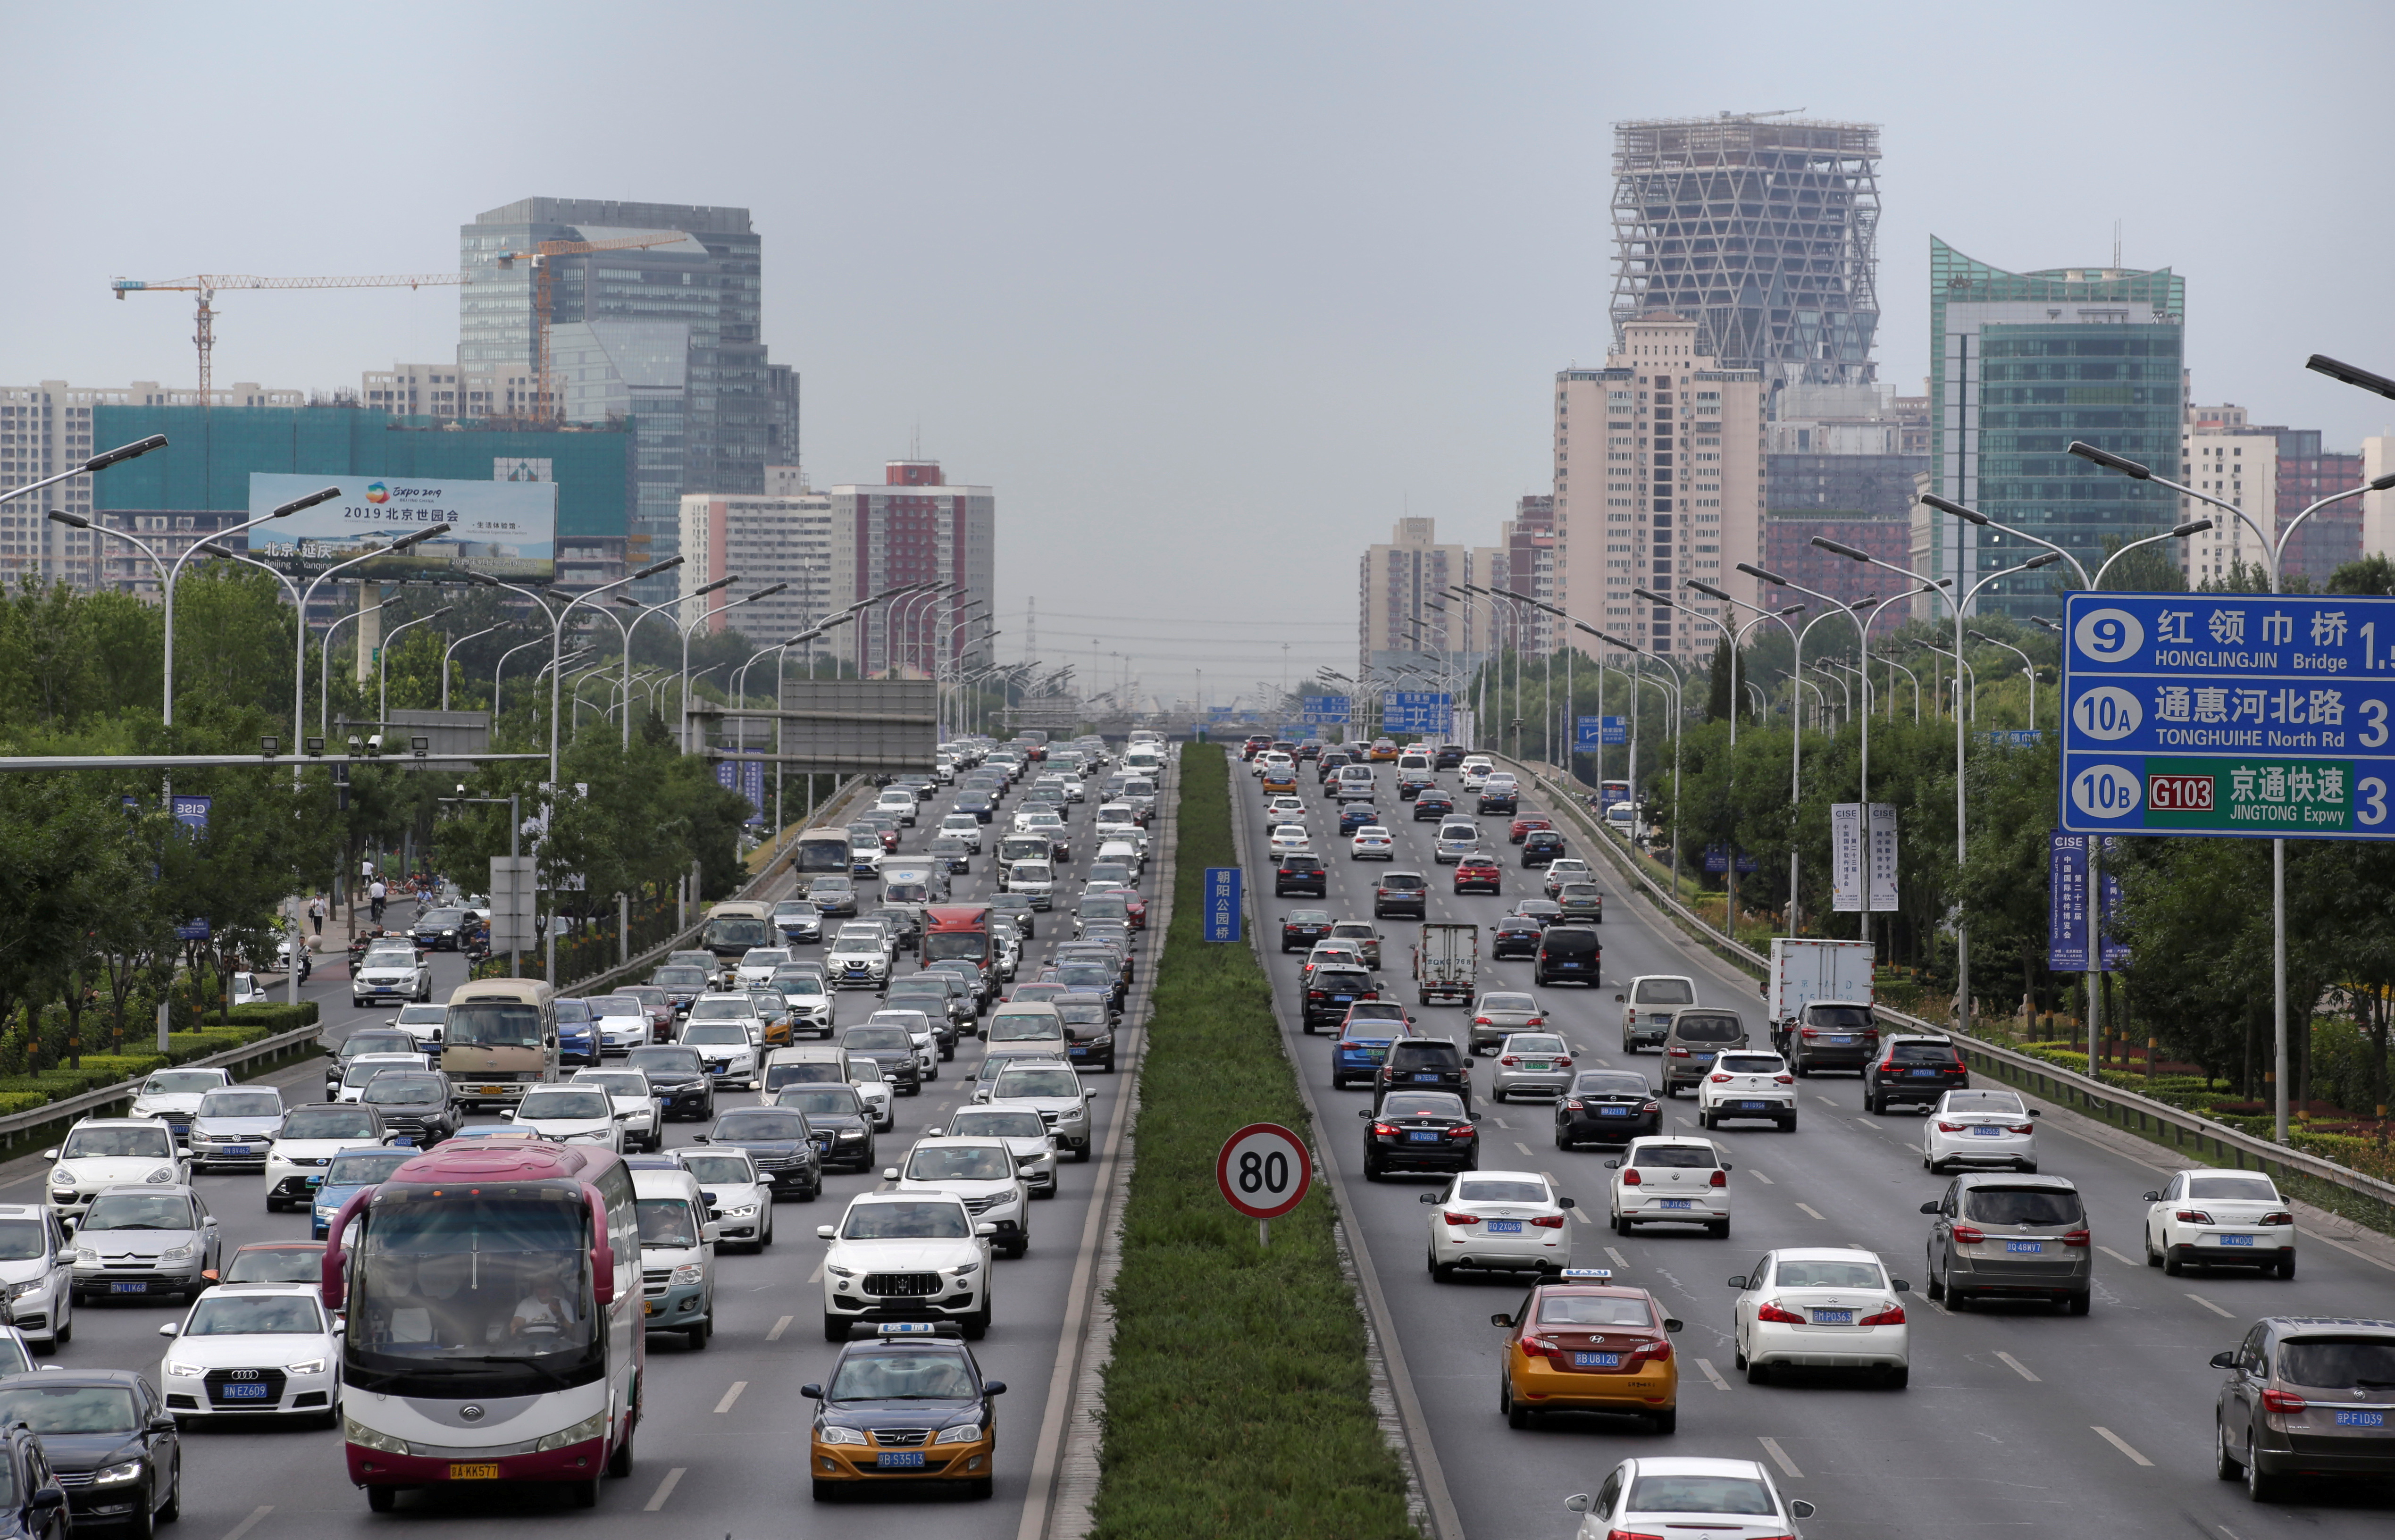 Cars drive on the road during the morning rush hour in Beijing, China, July 2, 2019. REUTERS/Jason Lee